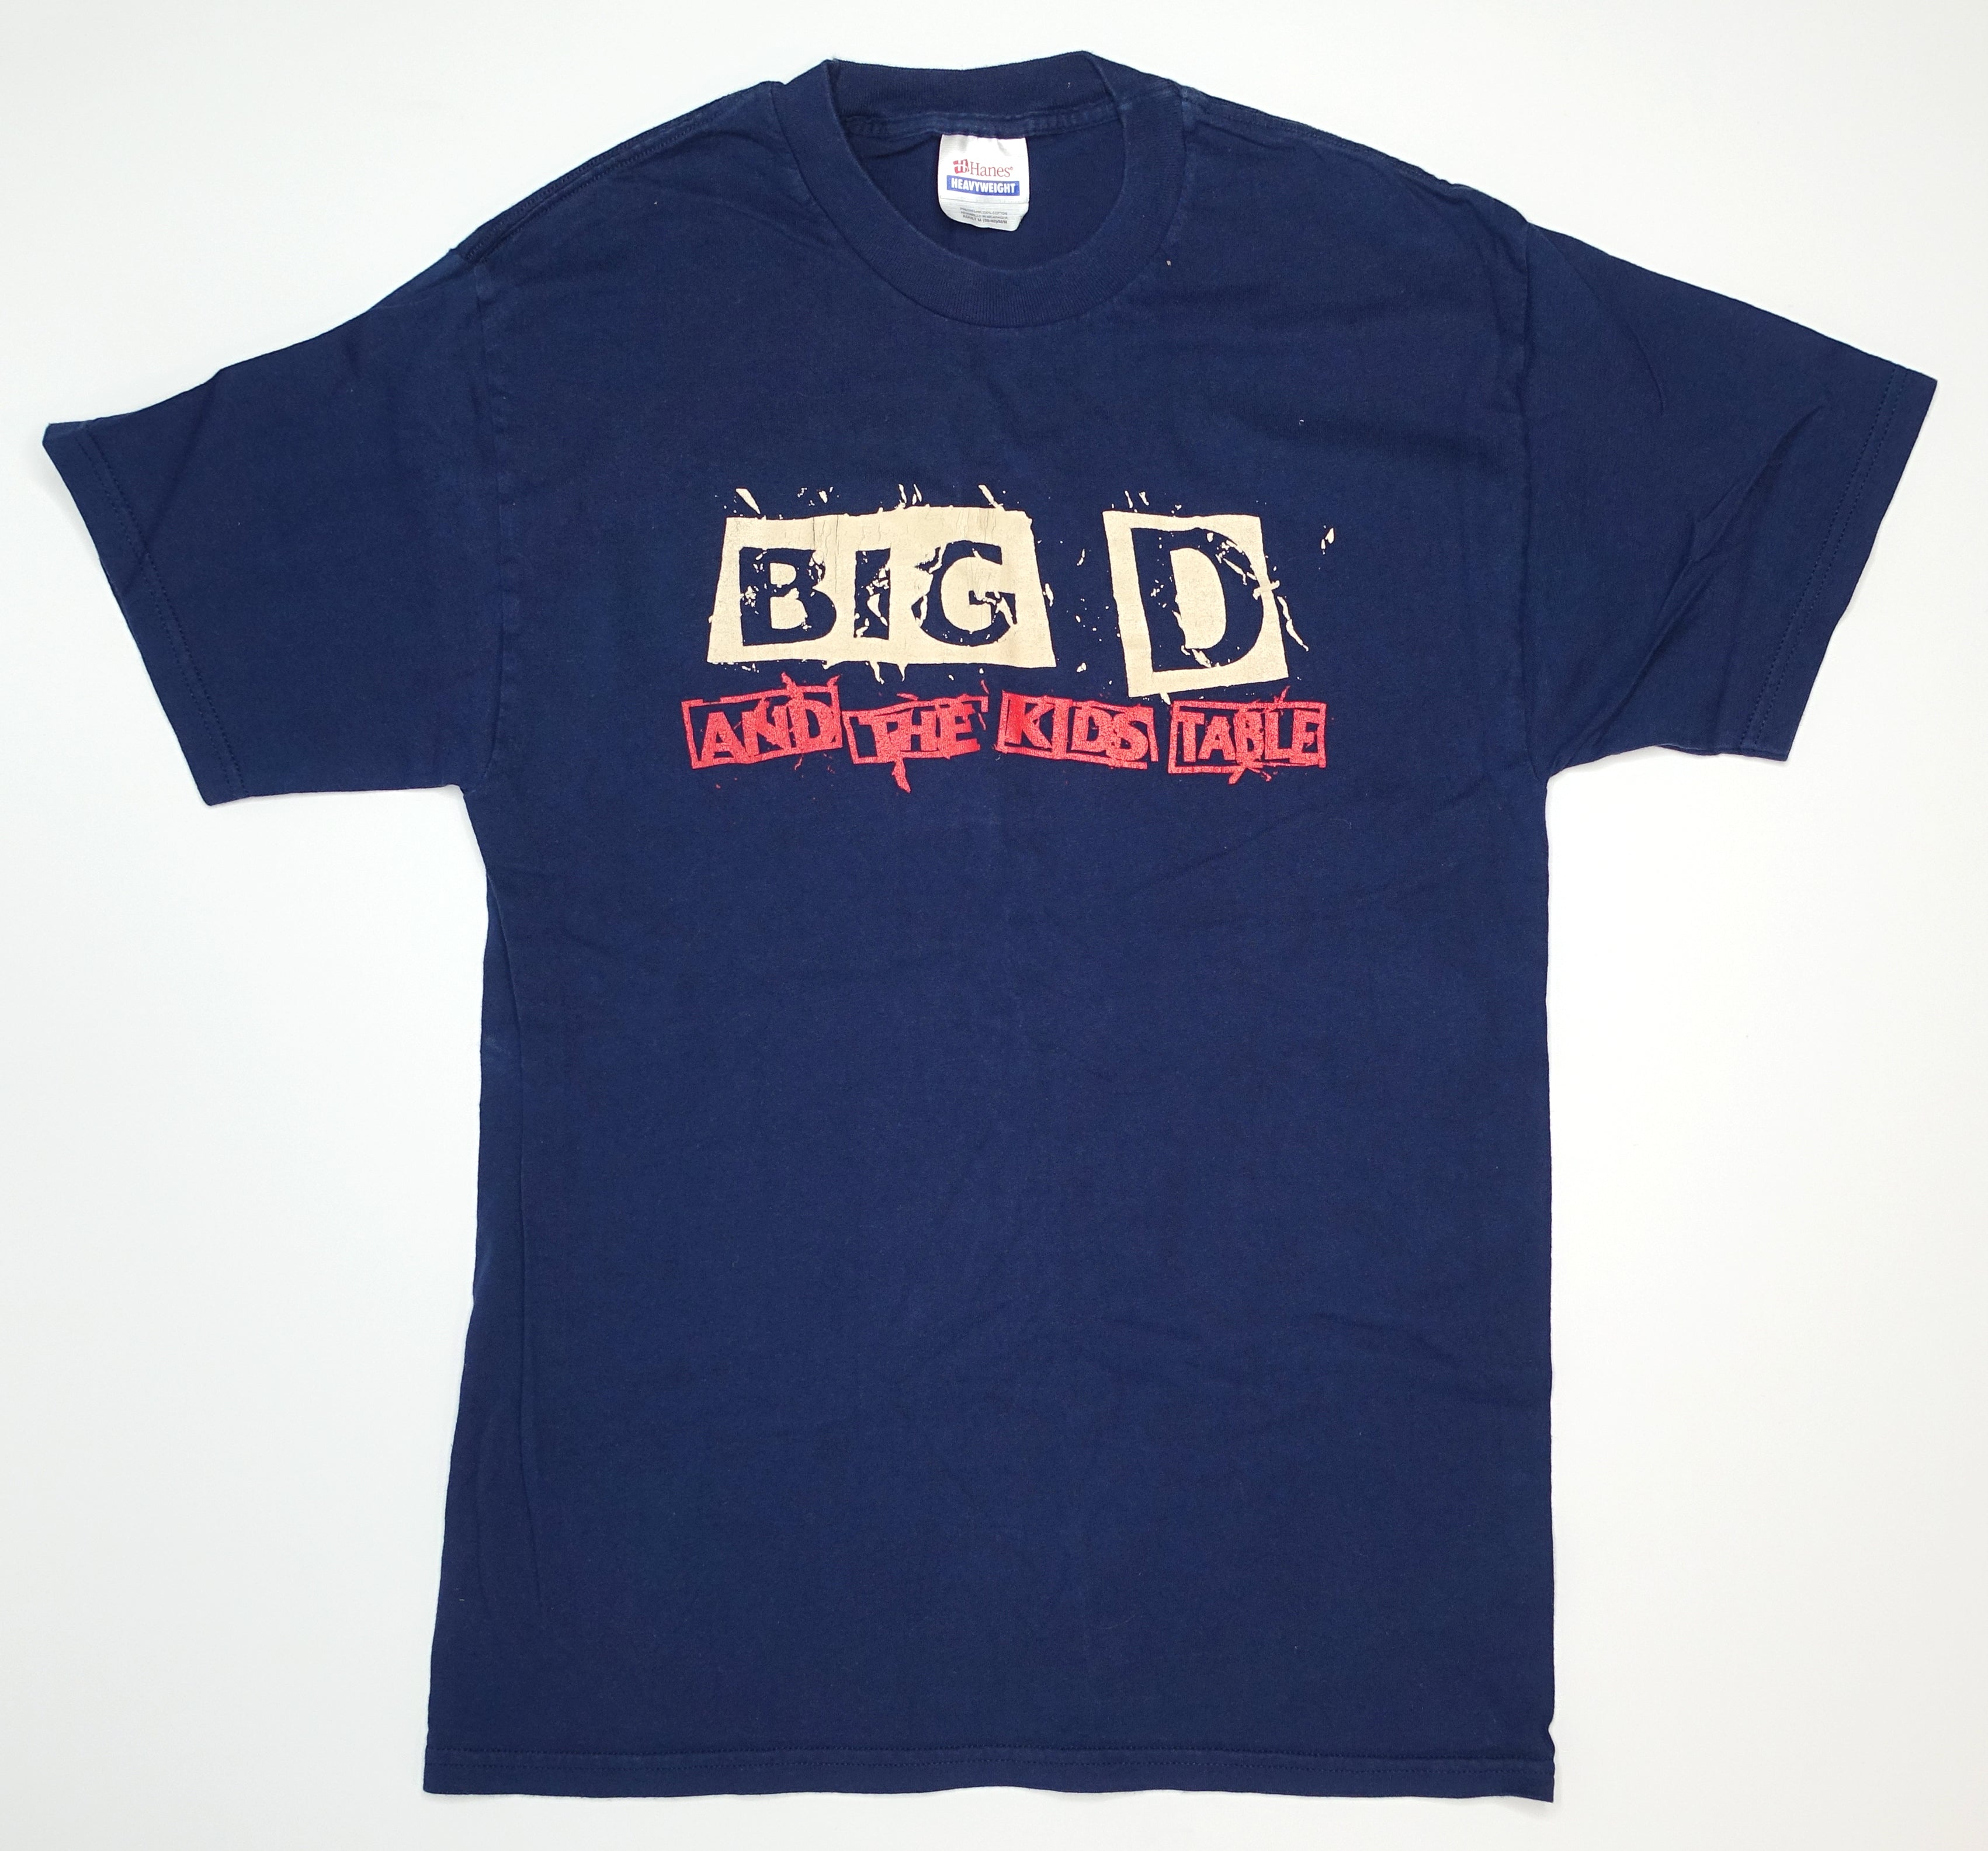 Big D And The Kids Table – Fork In Hand 1999 Tour Shirt Size Medium